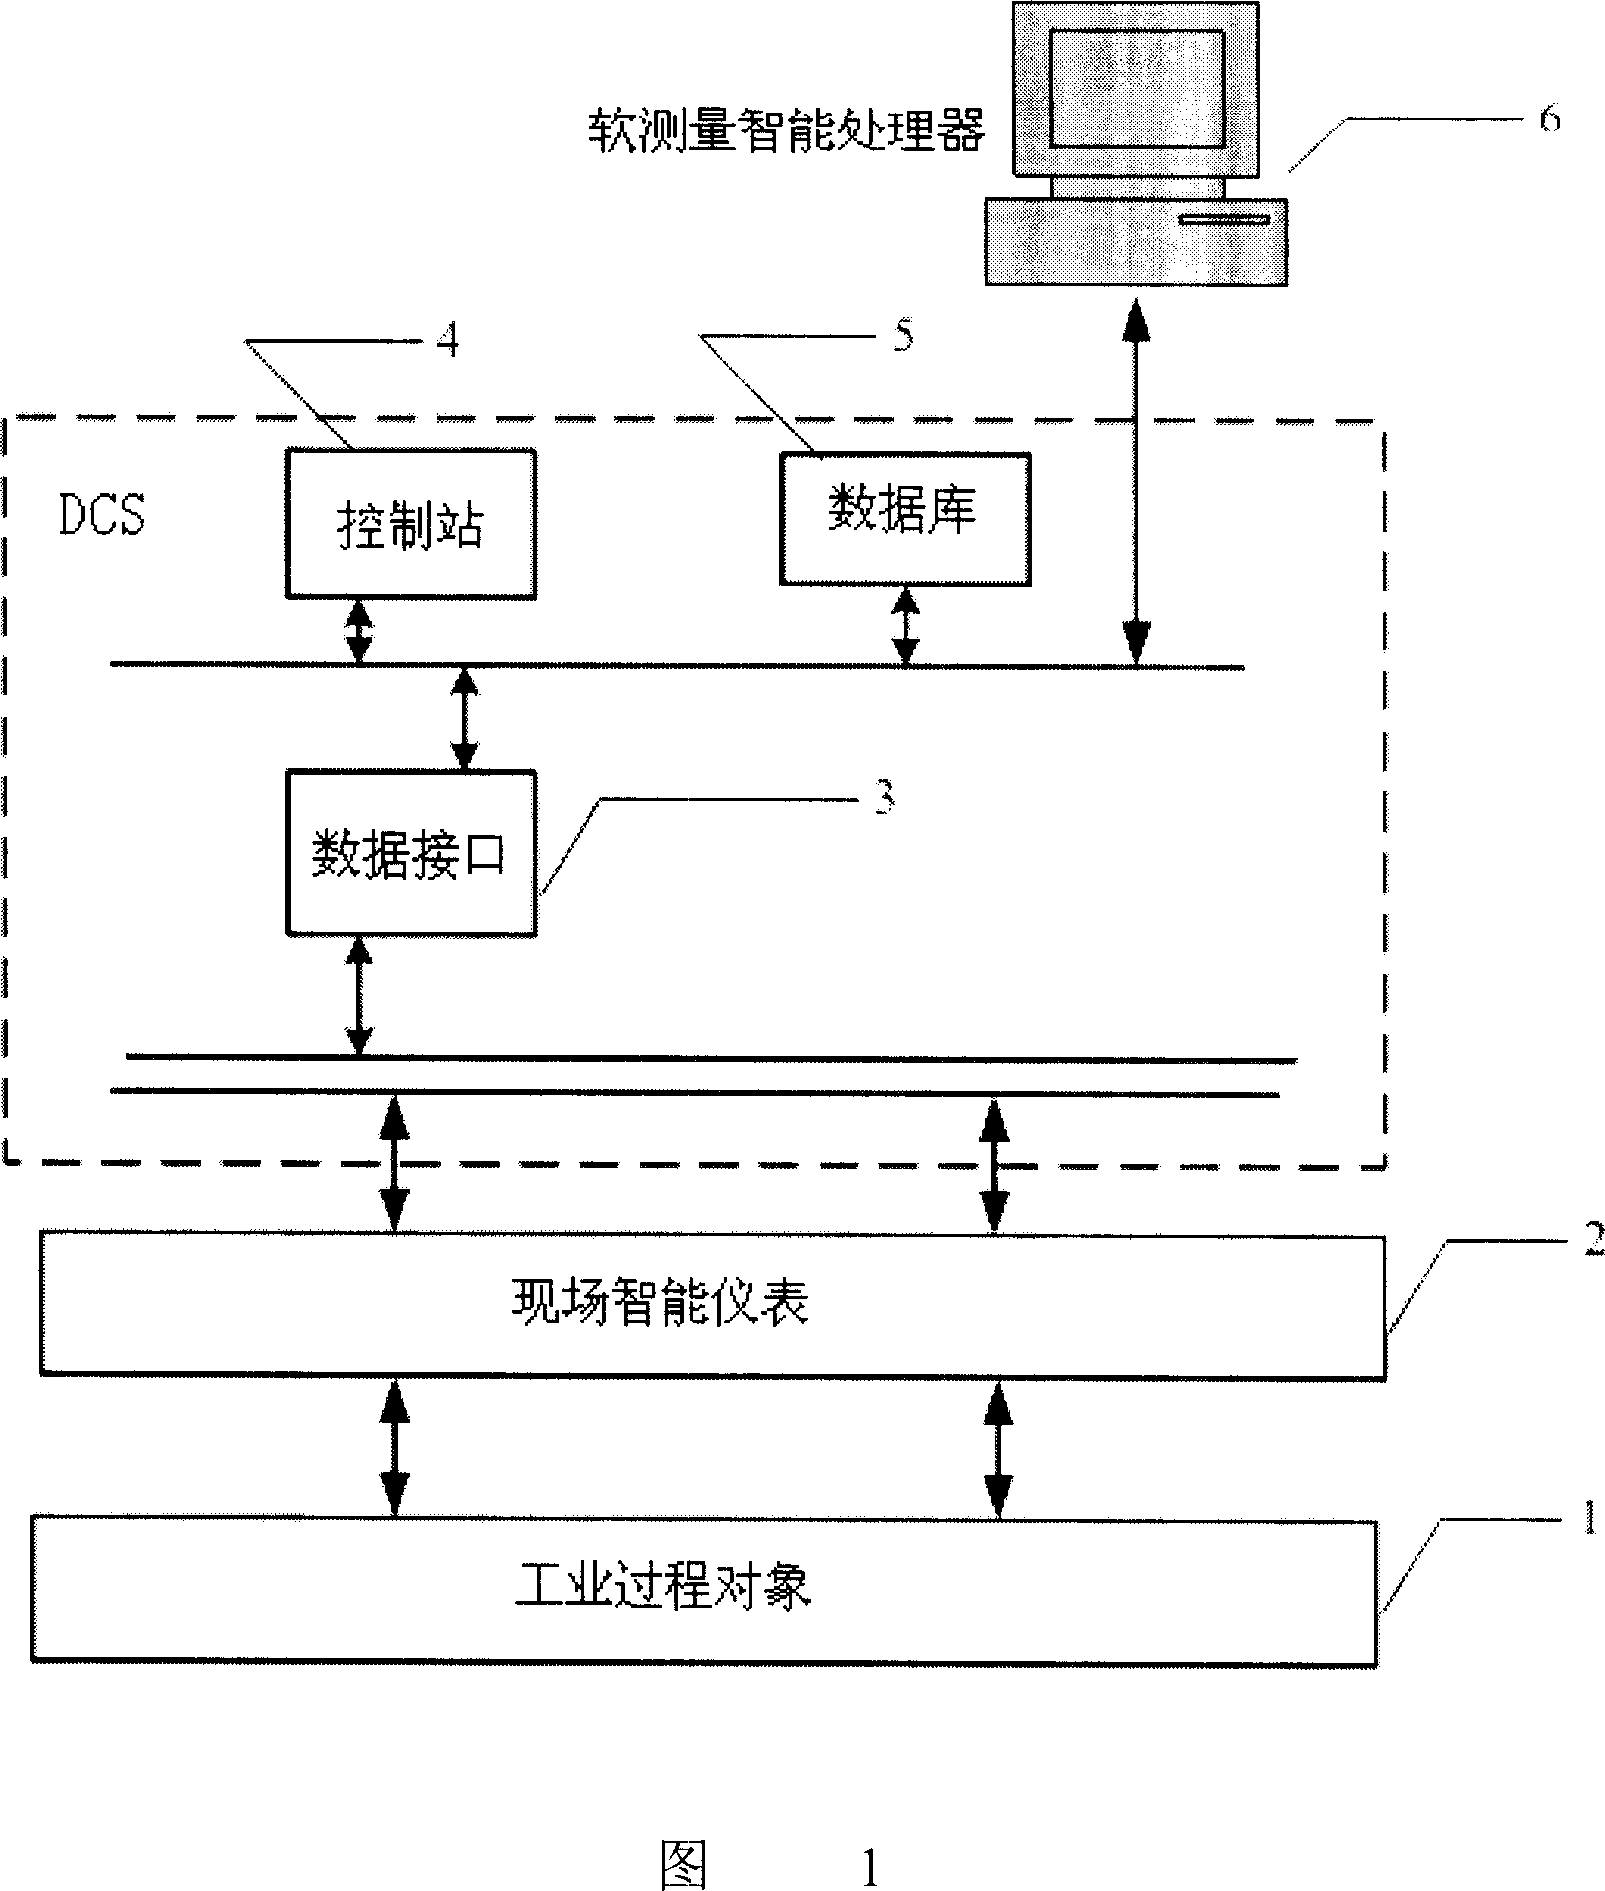 Industrial process multiresolution softsensoring instrument and method thereof